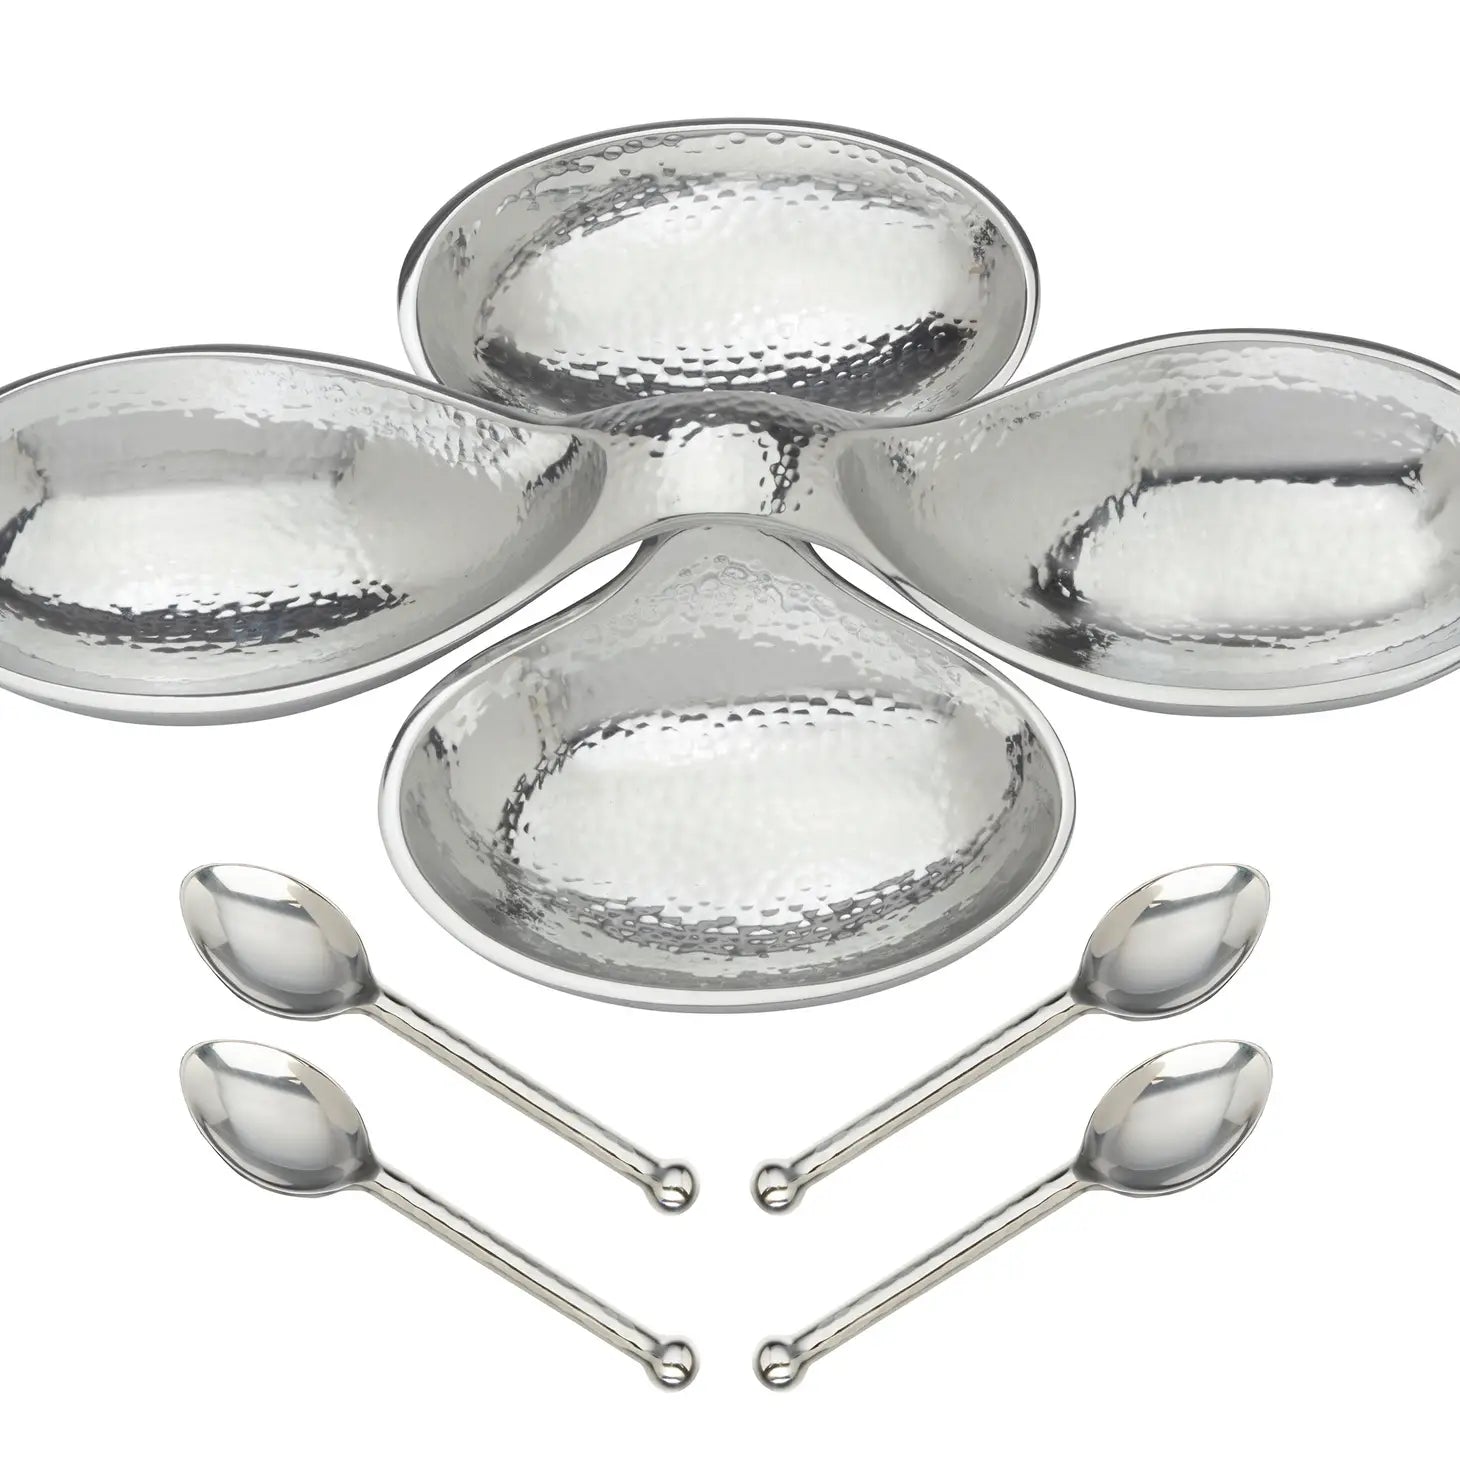 Hammered Silver Bowls with 4 Spoons